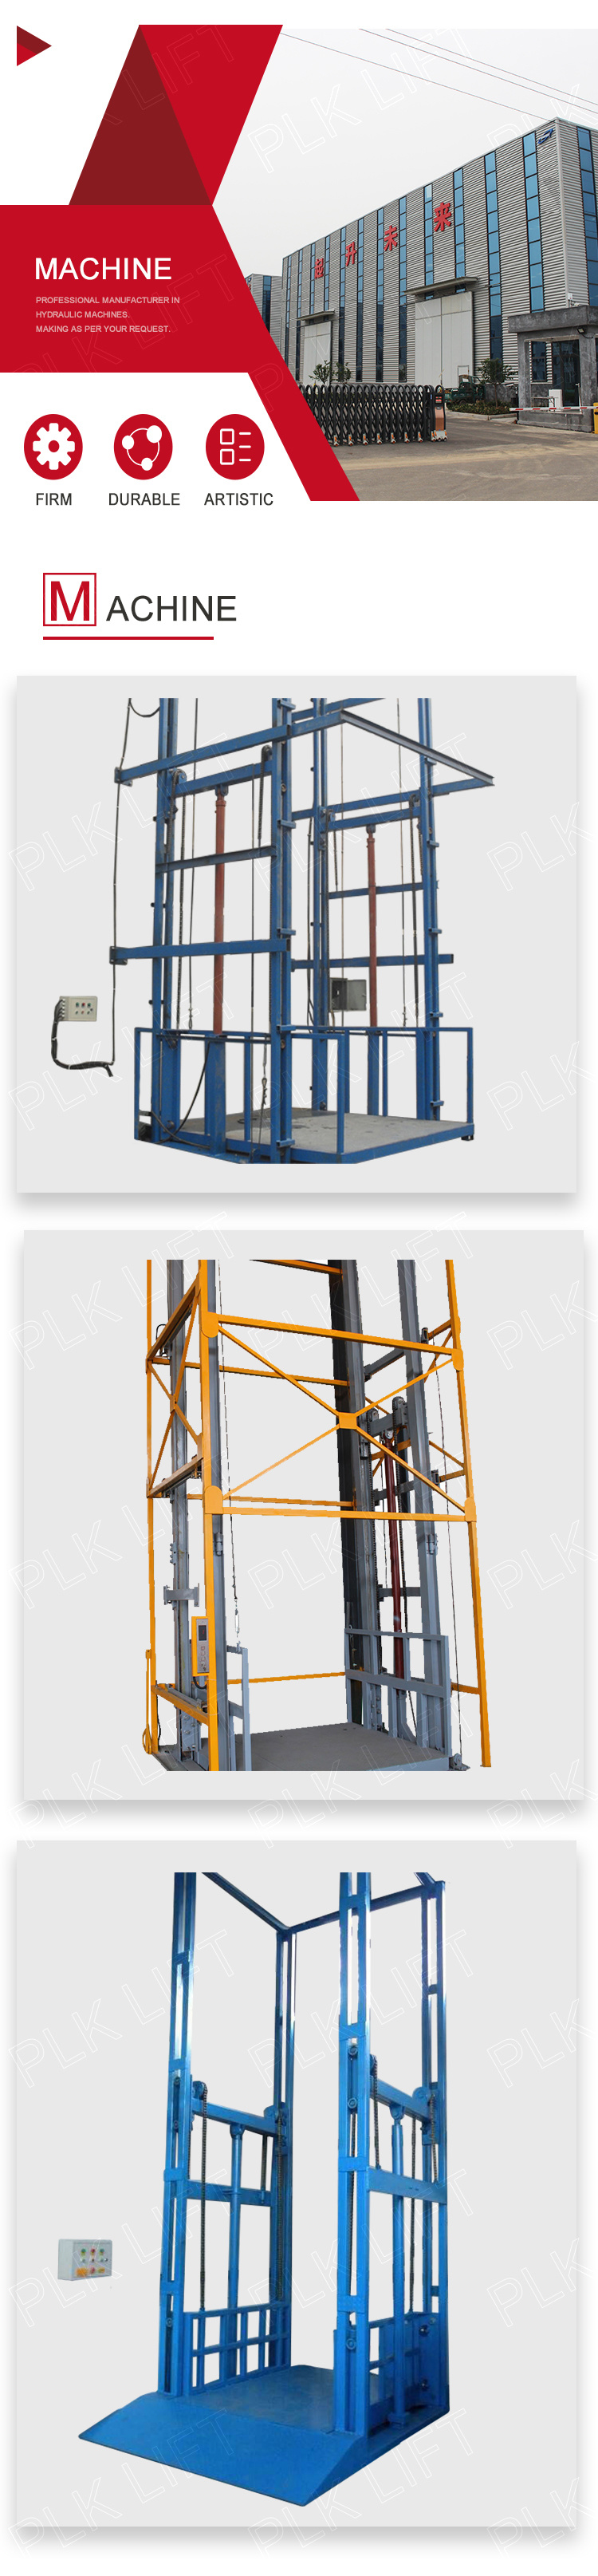 380V Electric Hydraulic Cargo Lift for Handling Materials